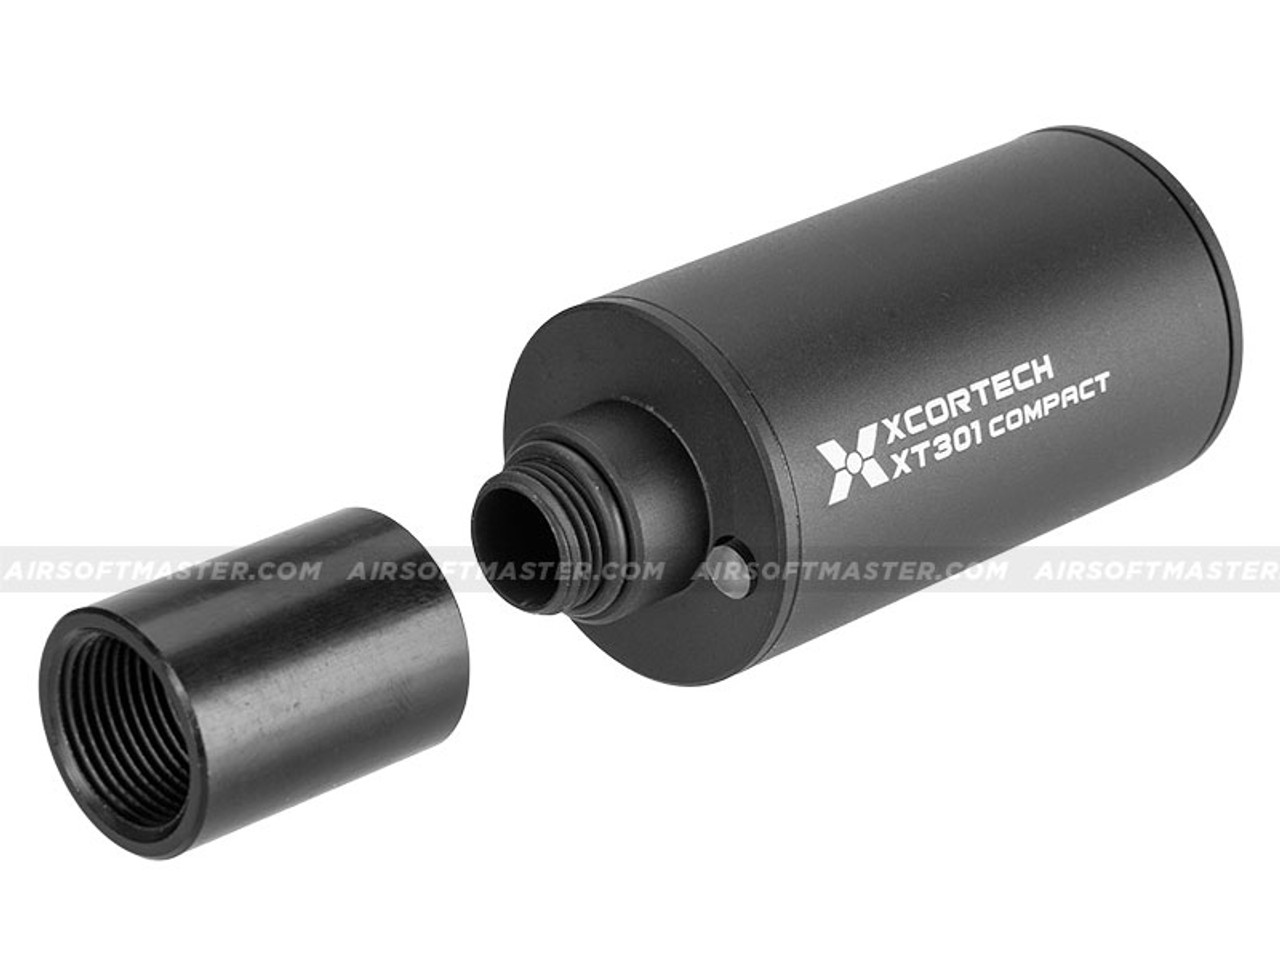 https://cdn11.bigcommerce.com/s-78737/images/stencil/1280x1280/products/4726/4030/xcortech-XT301-compact-airsoft-tracer-unit-black__61007.1532021929.jpg?c=2